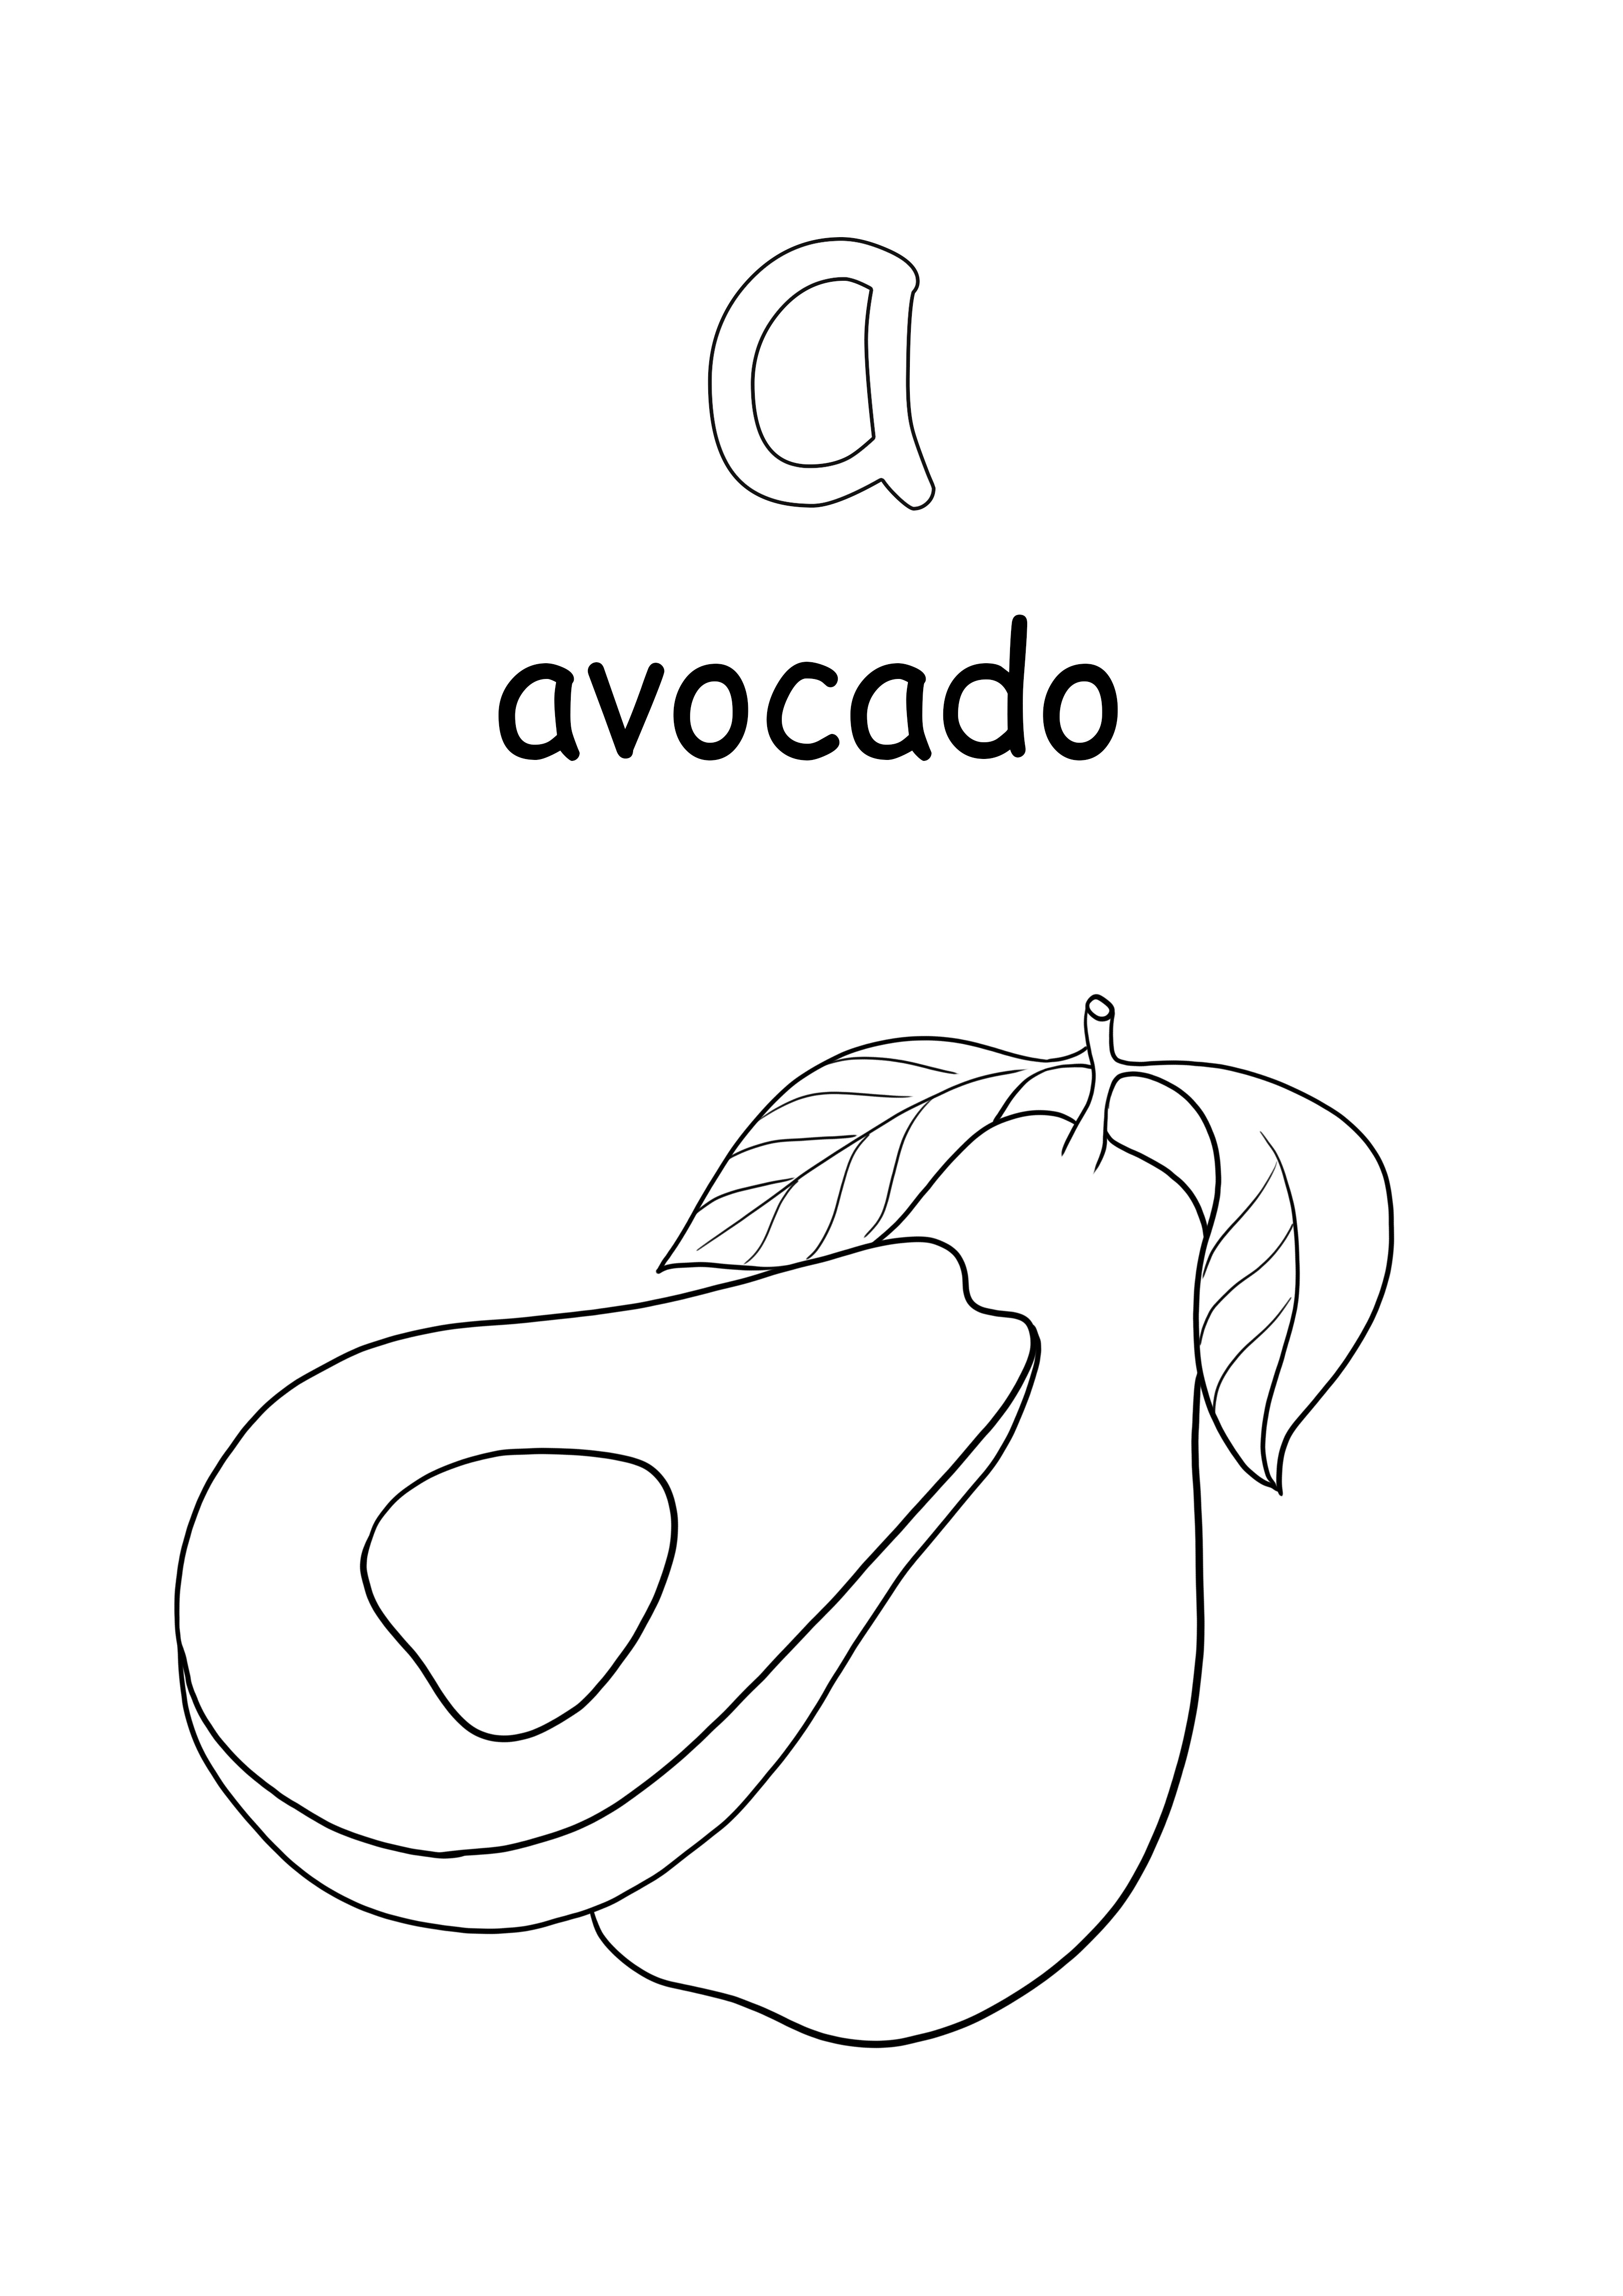 Lower case a letter and avocado word to color and print-free